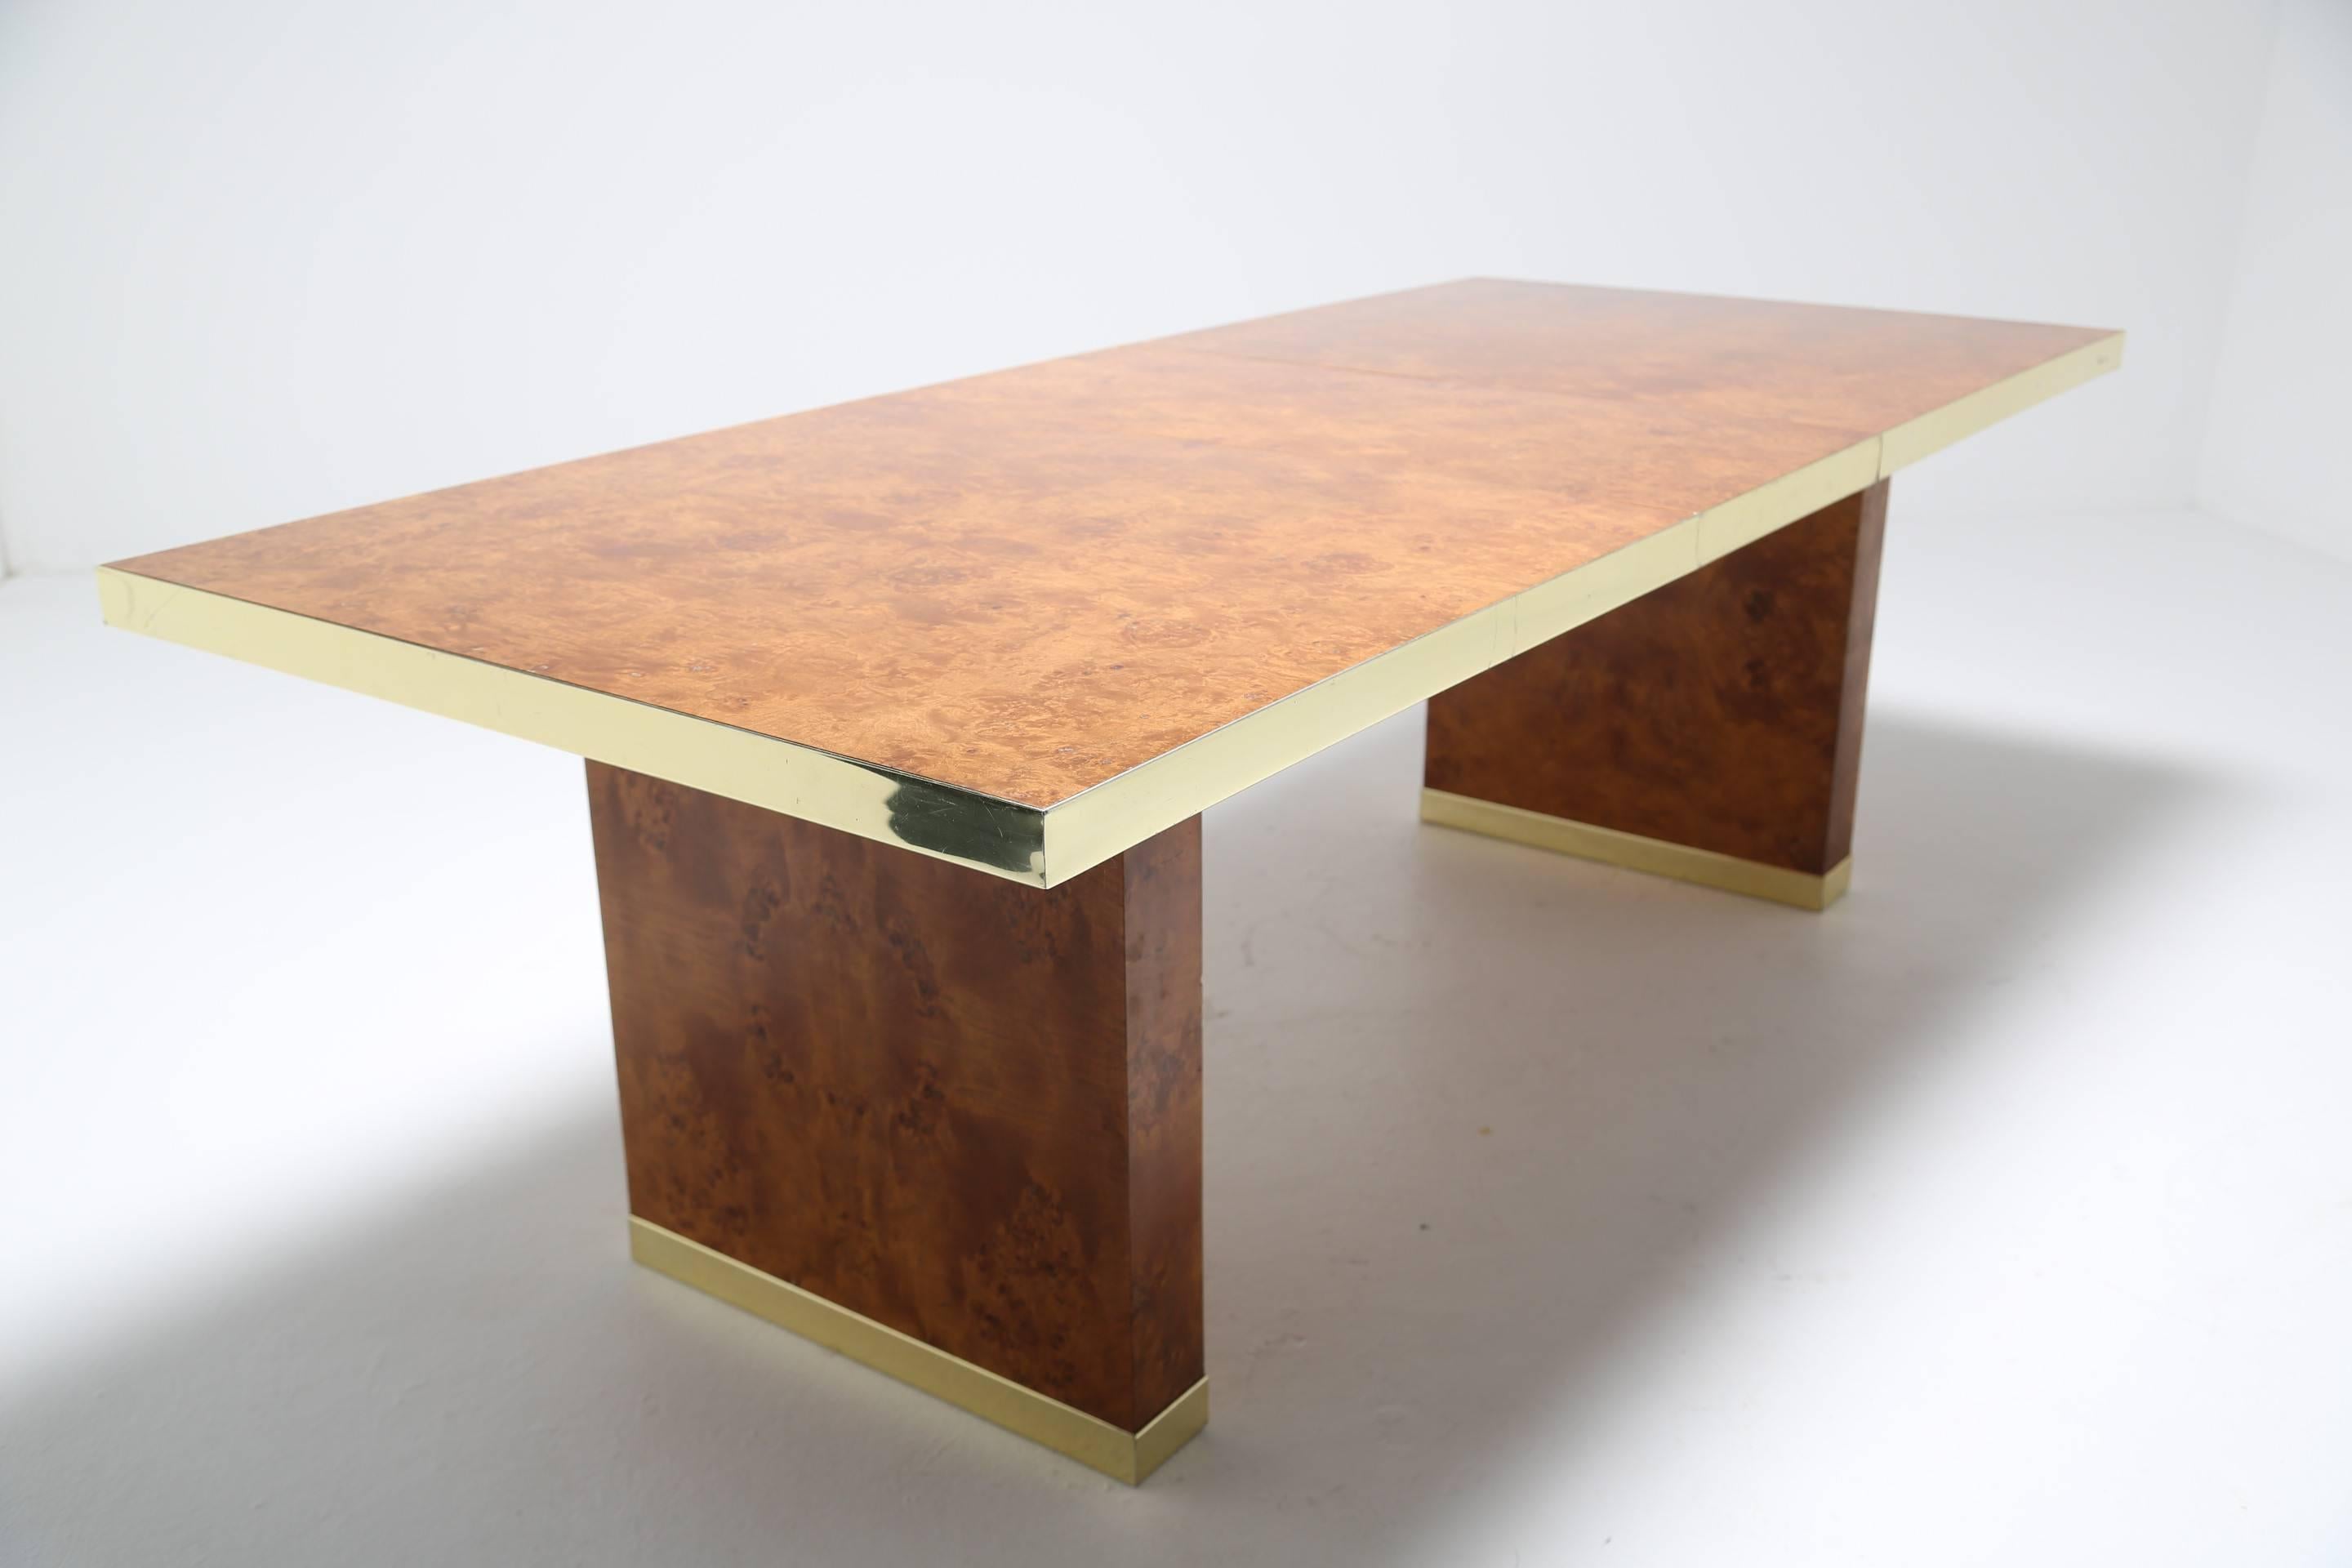 This handsome original (signed) Pierre Cardin dining table is made from a beautiful burr maple and trimmed in brass. It is 229.5 cm long when fully extended and can comfortably seat eight to ten people. The easy to remove leaf on this extendable